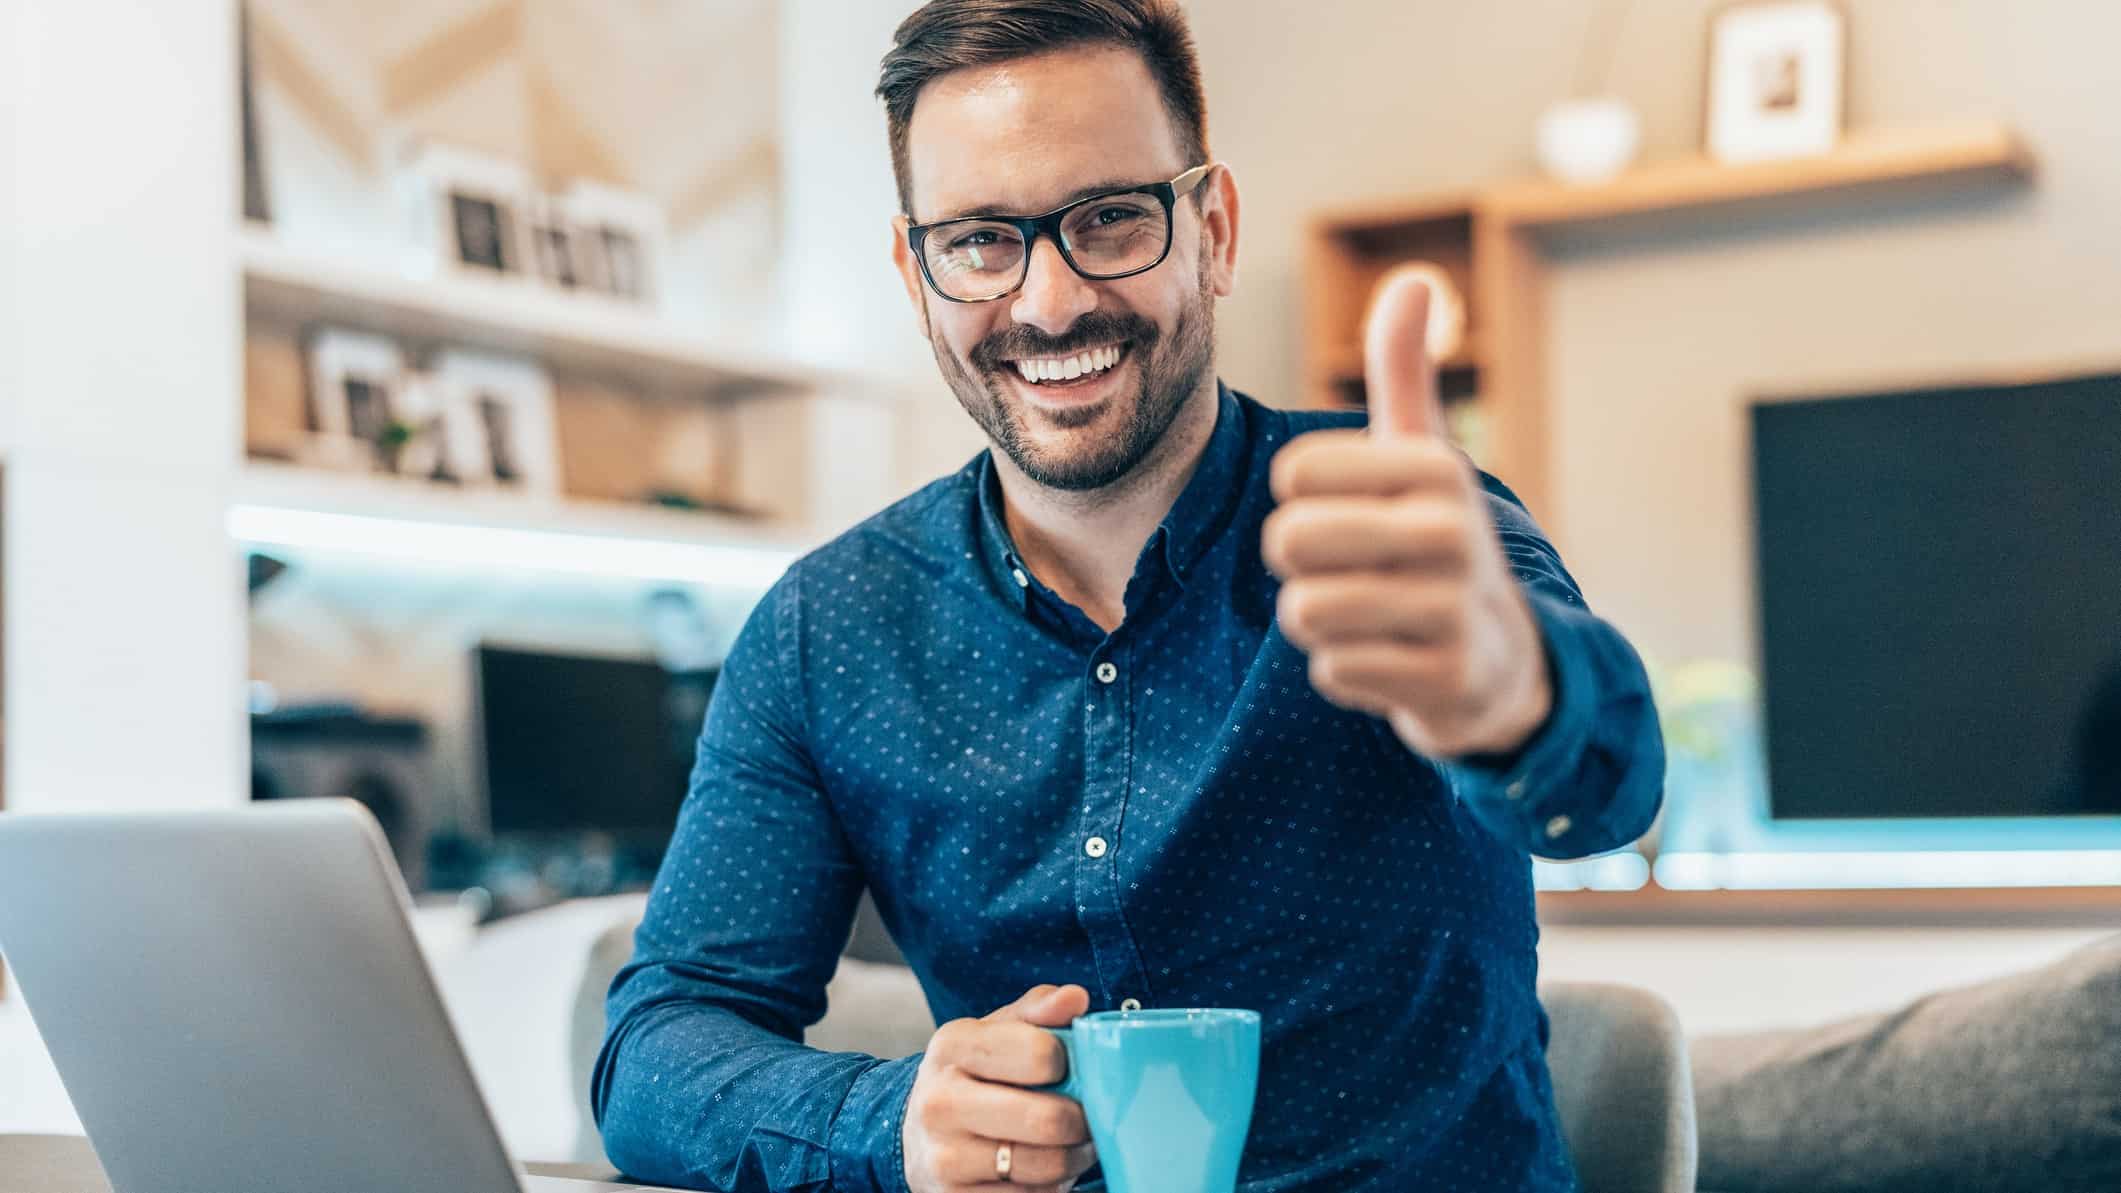 A man holding cup of coffee puts his thumb up and smiles while at laptop.